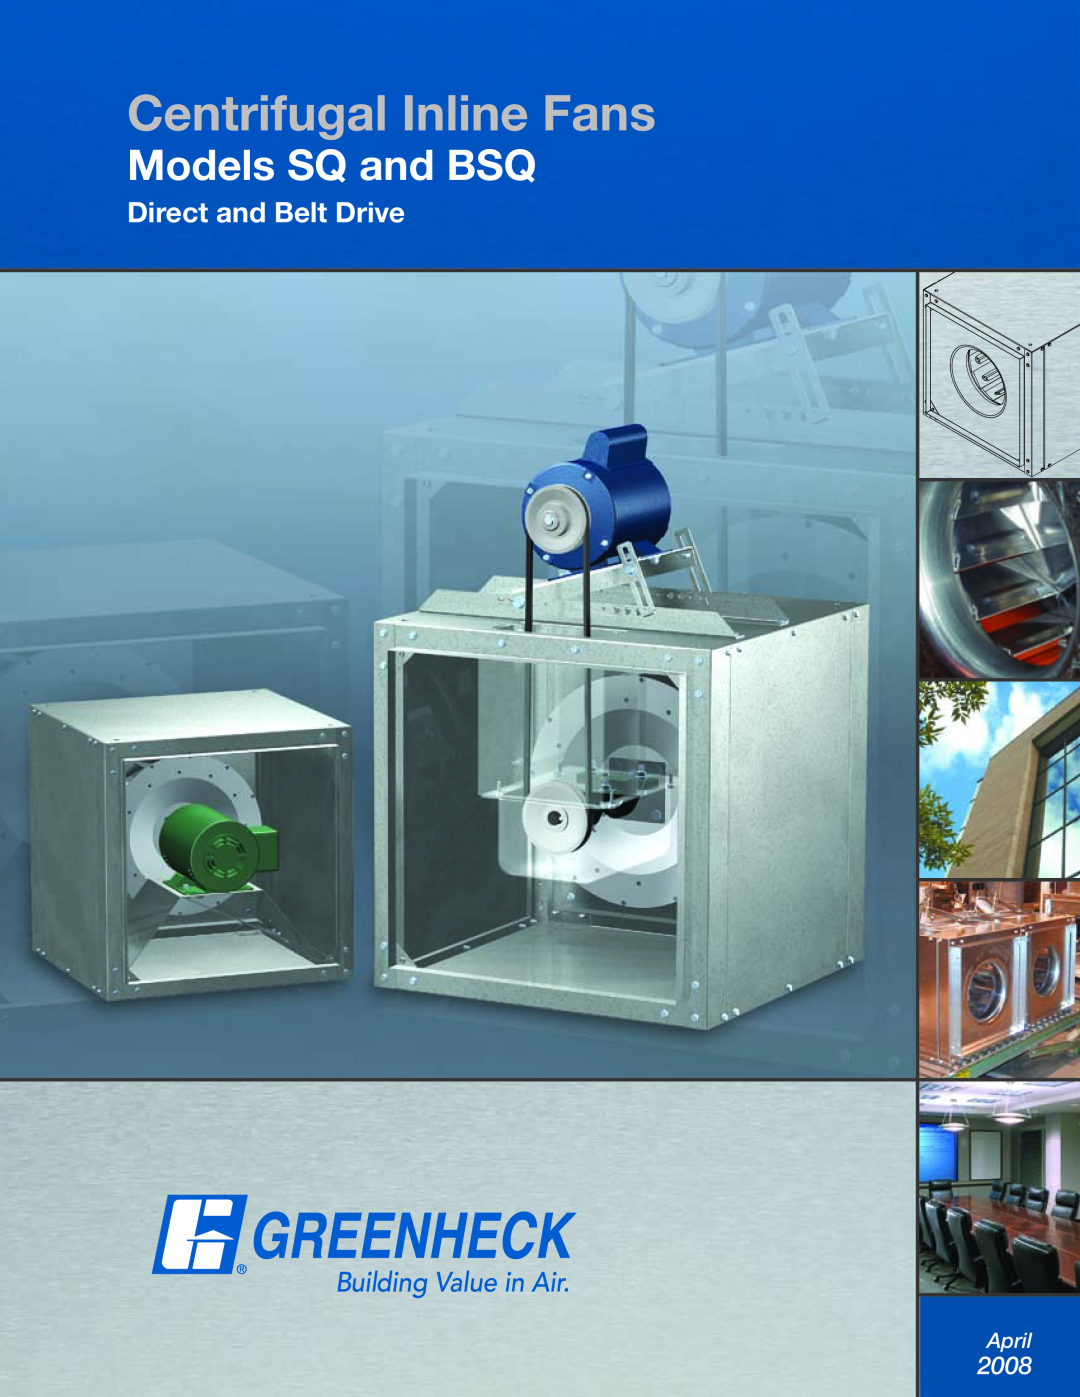 Greenheck Fan manual Centrifugal Inline Fans, Models SQ and BSQ, Direct and Belt Drive, 2008, April 